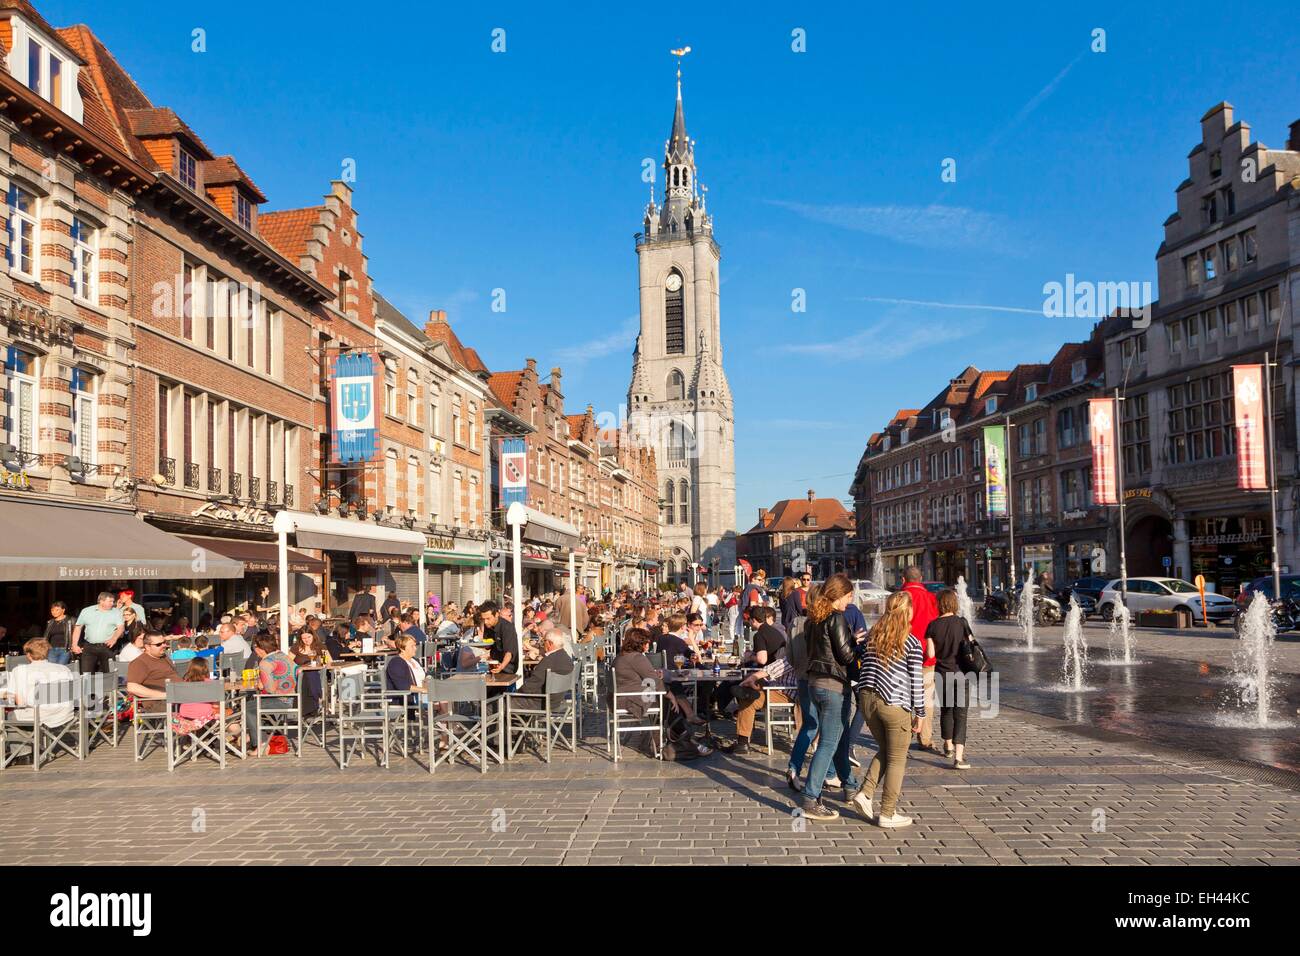 Belgium, Wallonia, Hainaut province, Tournai, grand place and belfry listed as World Heritage by UNESCO Stock Photo